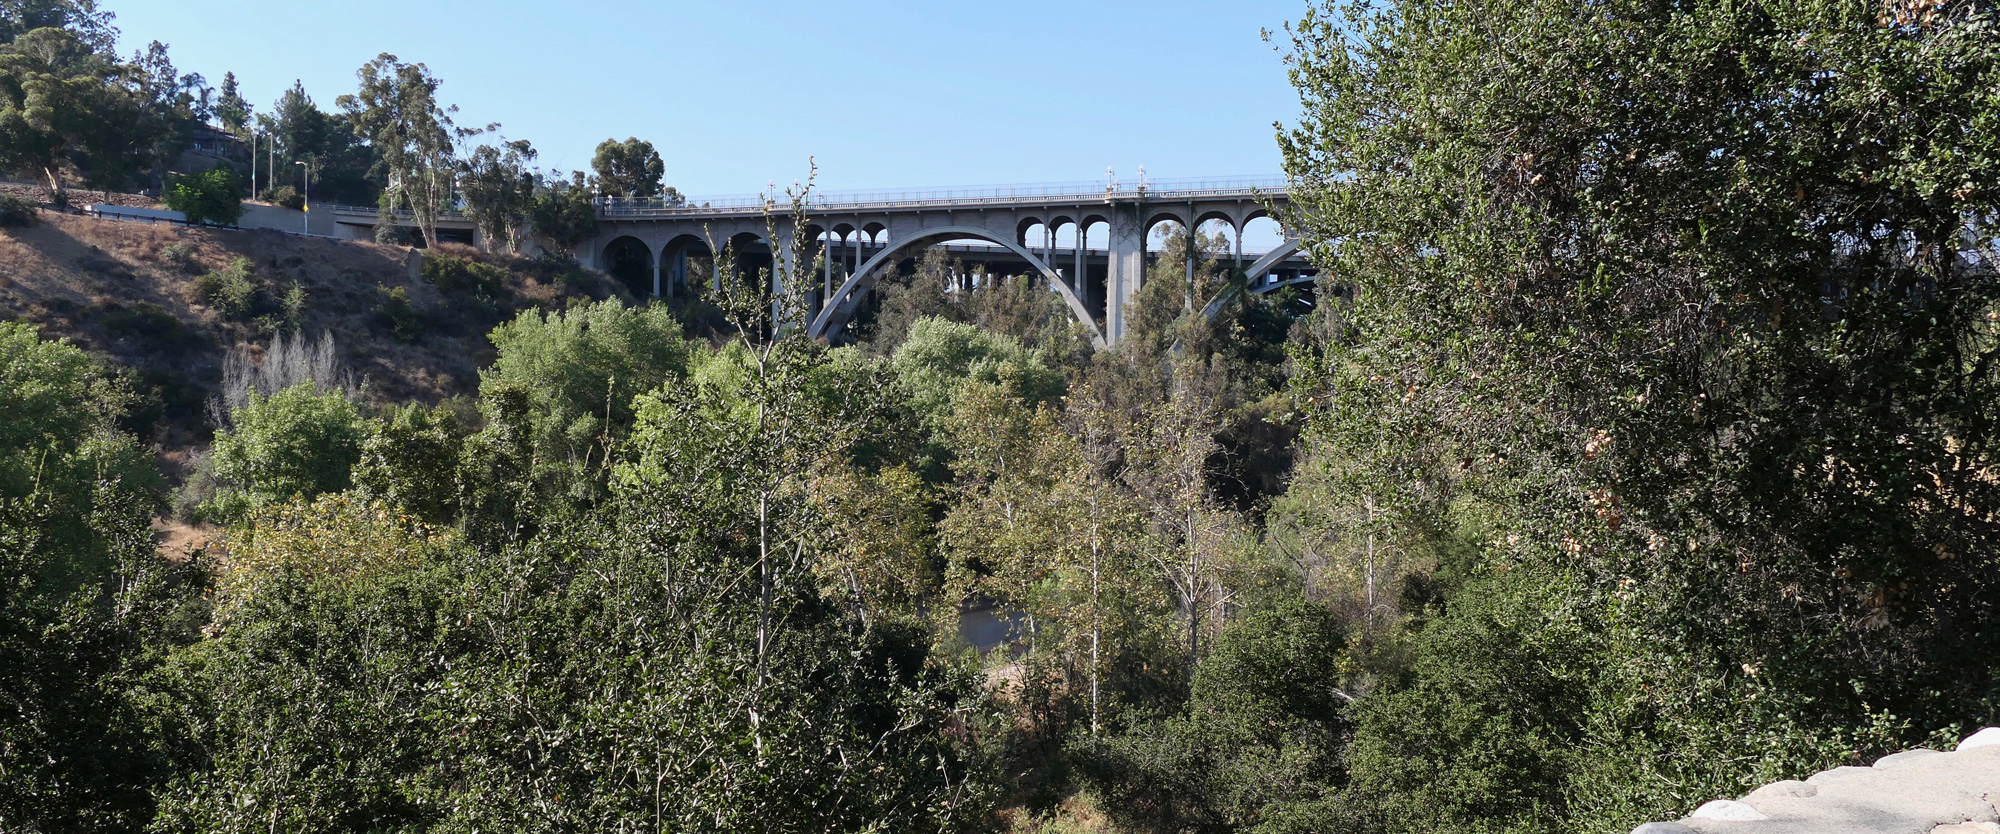 The Bridge and Arroyo as seen from the Casita